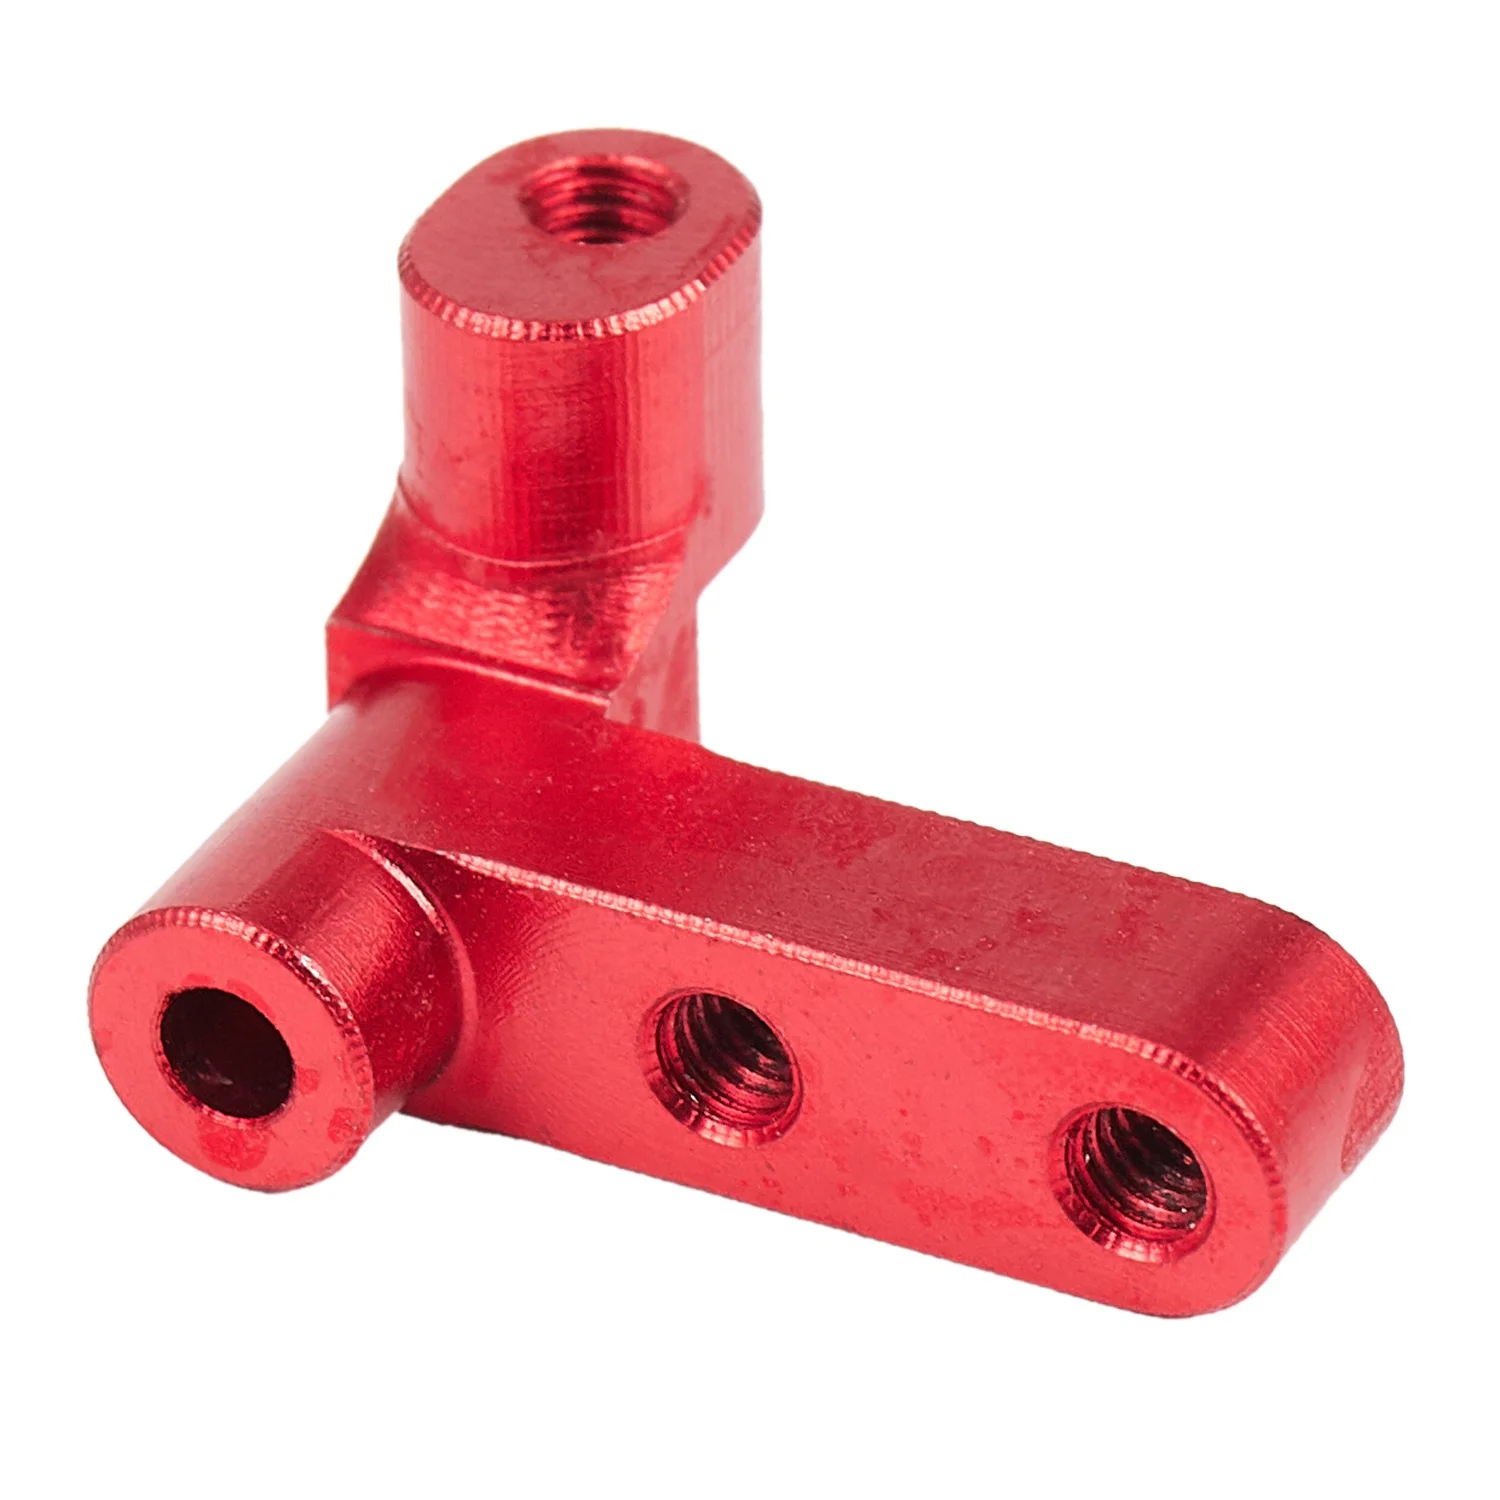 

1 Pcs Metal Upgrad Steering Cylinder Mounting Block for Wltoys A949 A959-B A979-B A969,Red